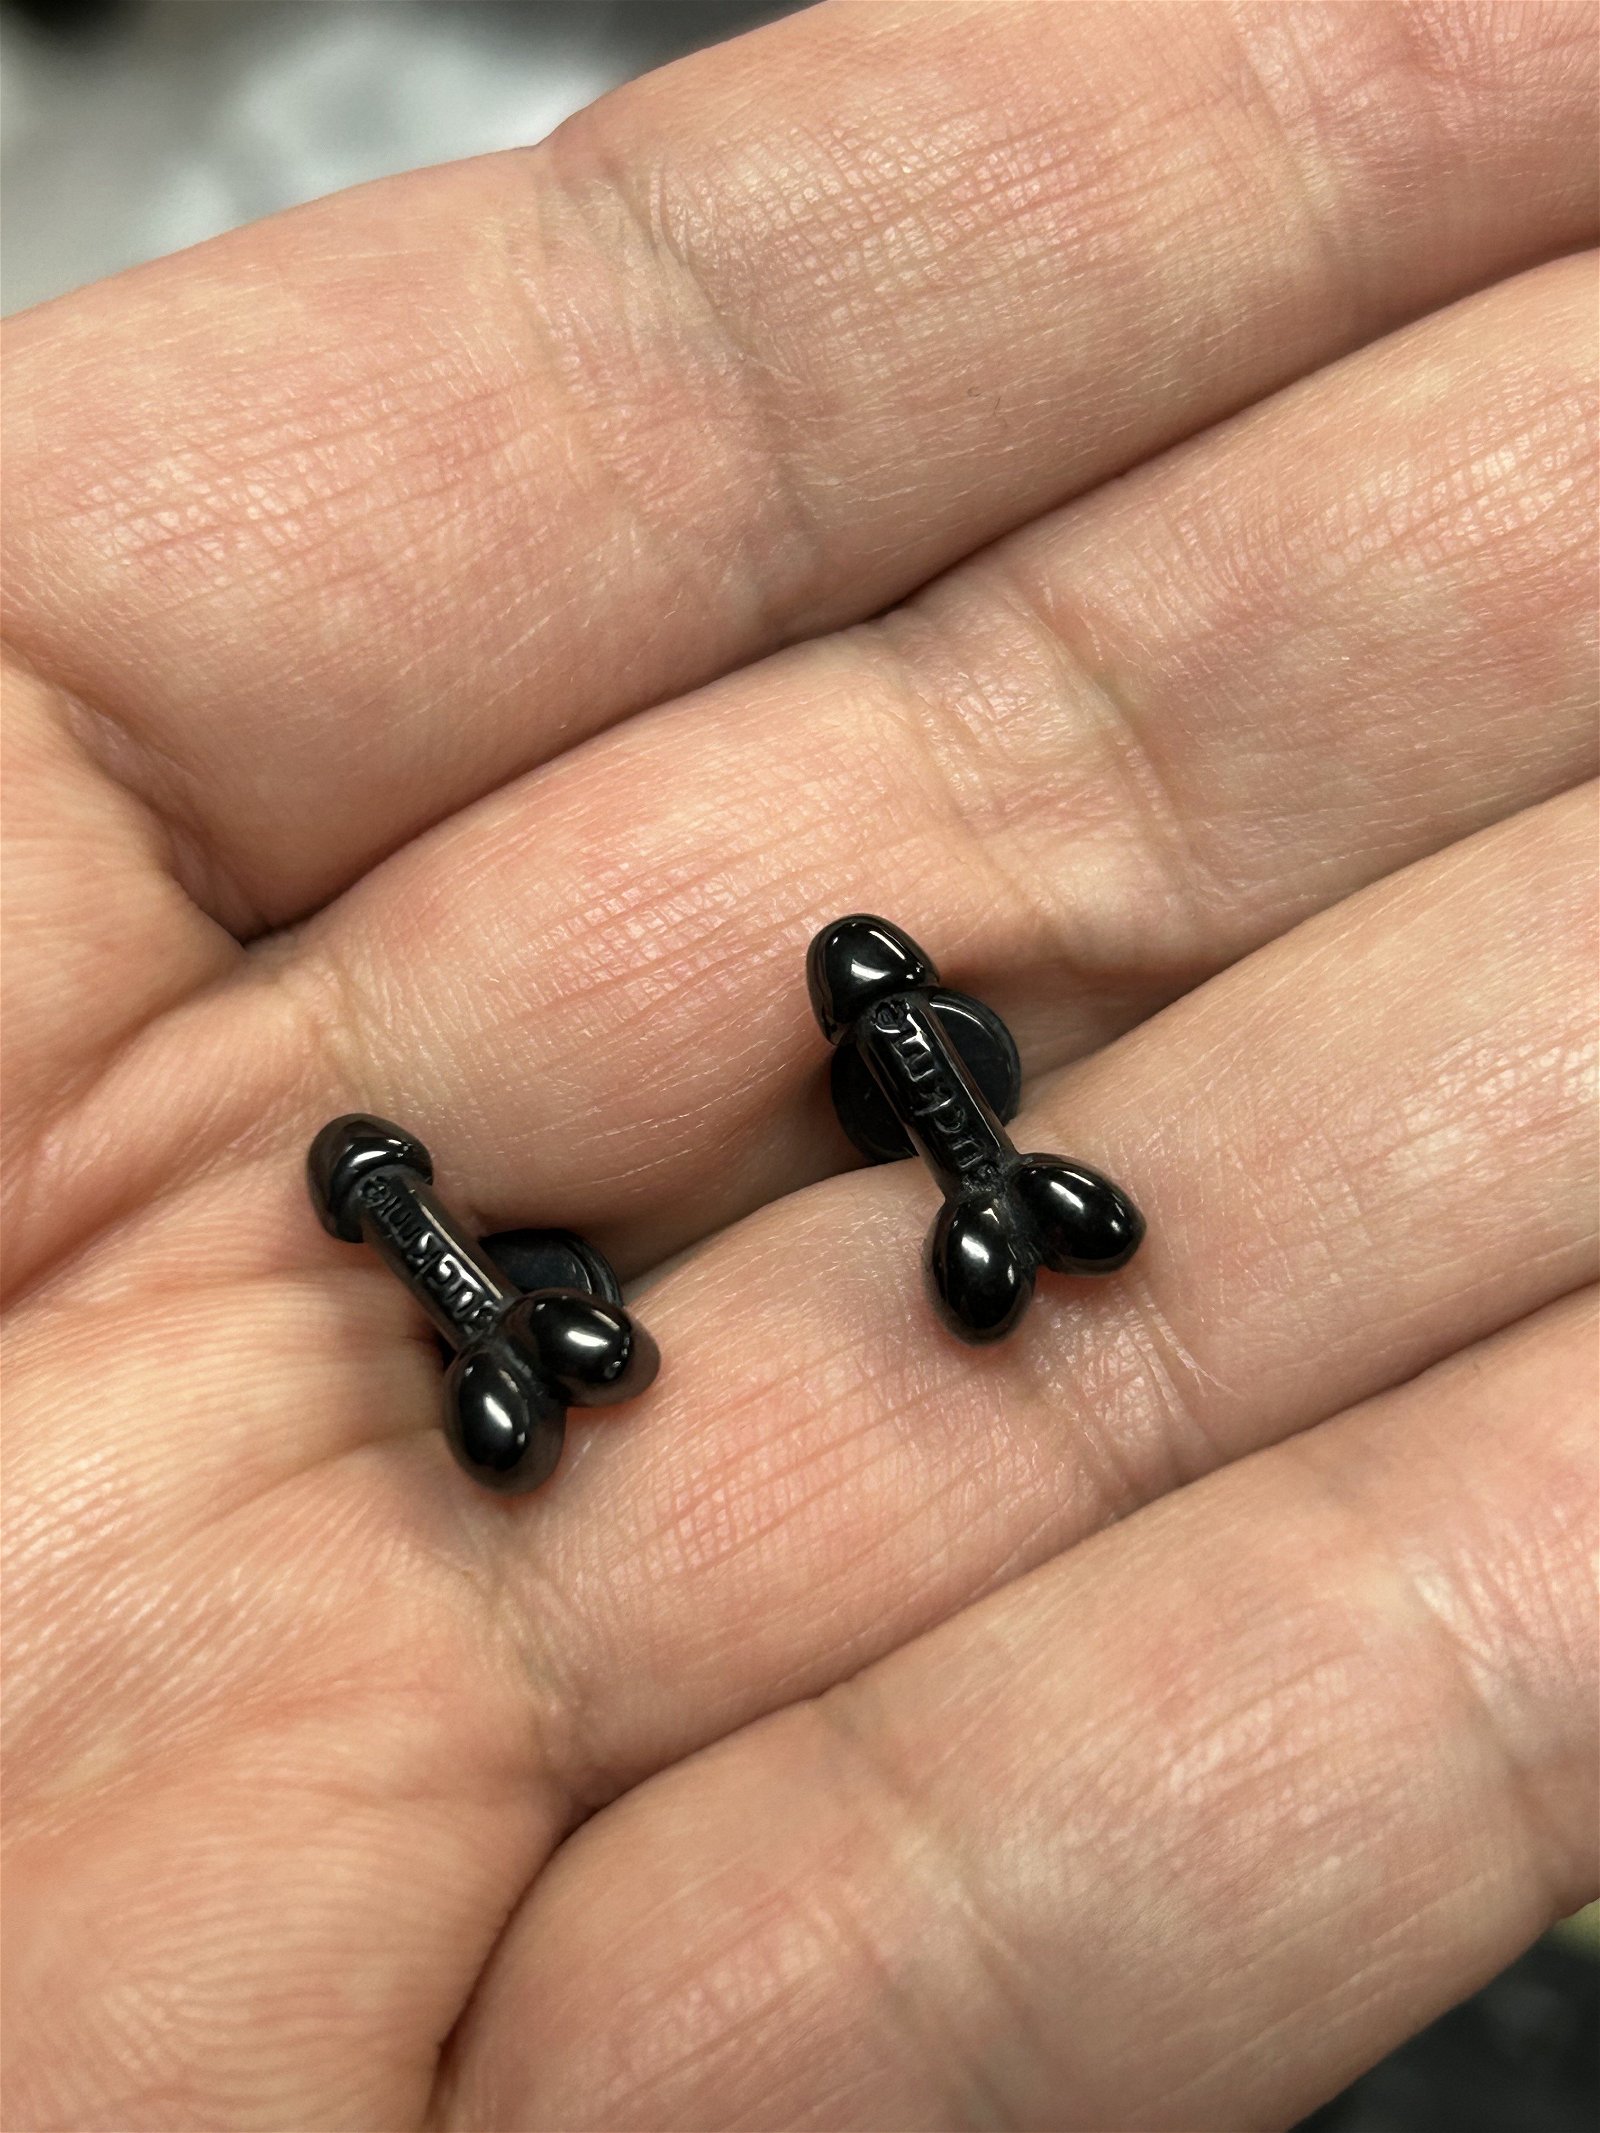 Photo by DirtyDaddyFunStuff with the username @DirtyDaddyPorn, who is a verified user,  February 15, 2024 at 10:32 PM and the text says 'https://whozitzandwhatzitz.com/products/suck-me-penis-earrings
Our fun little Gay Owned Shop has #penis #suckme #earrings  . Gold Steel, Black Steel or Silver Steel.  #cock #cocklovers #oral'